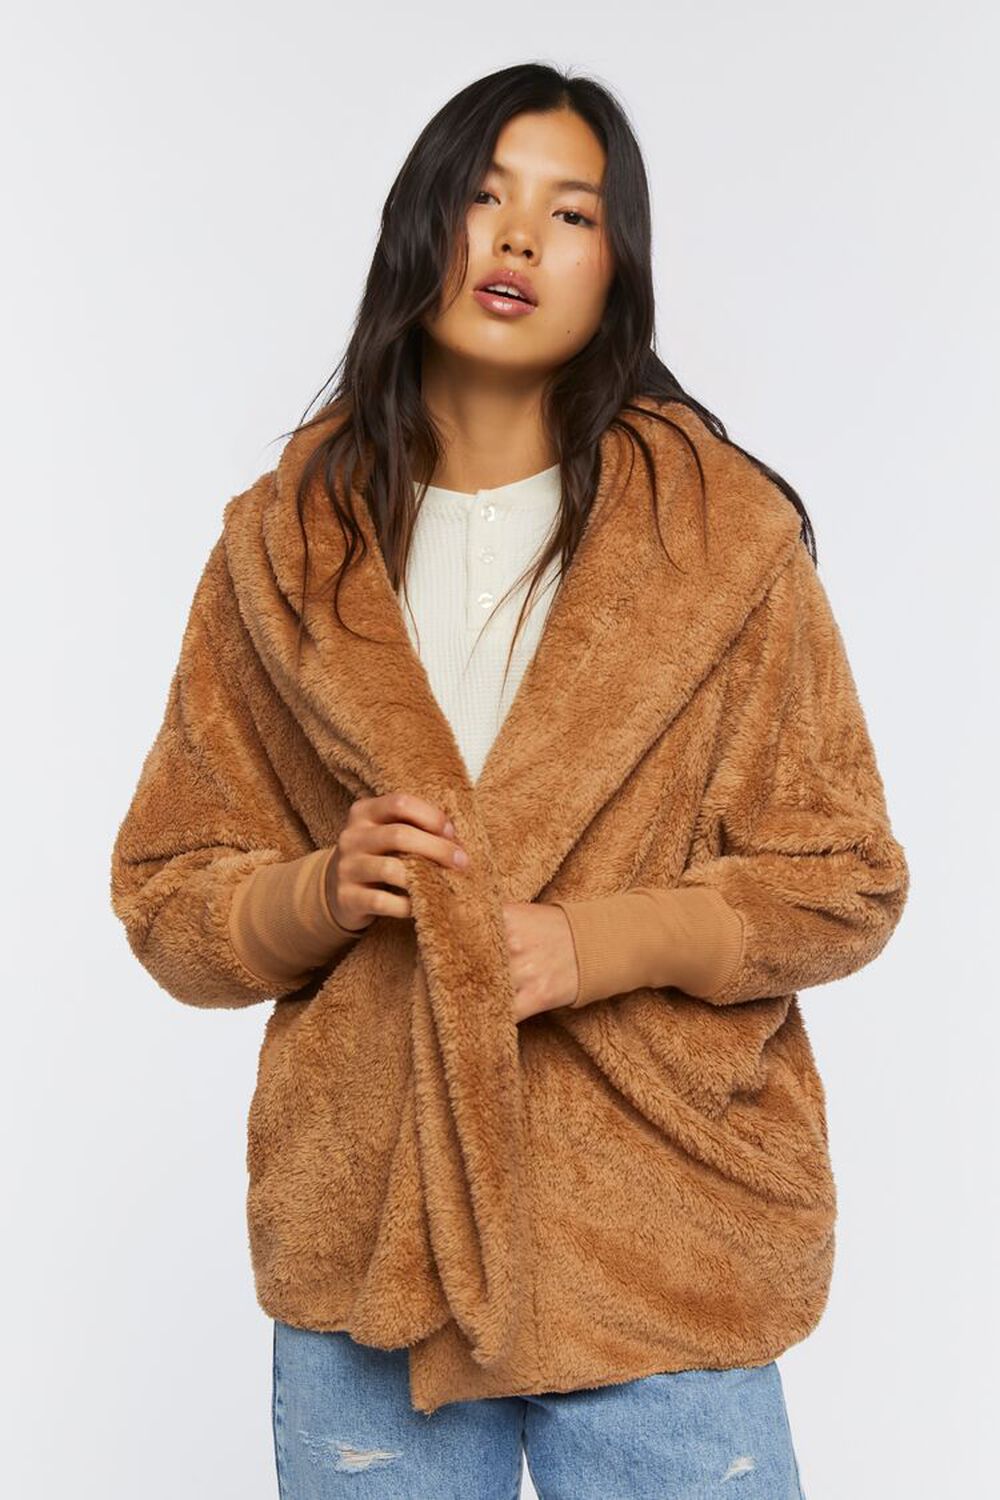 TAUPE Faux Shearling Hooded Jacket, image 1